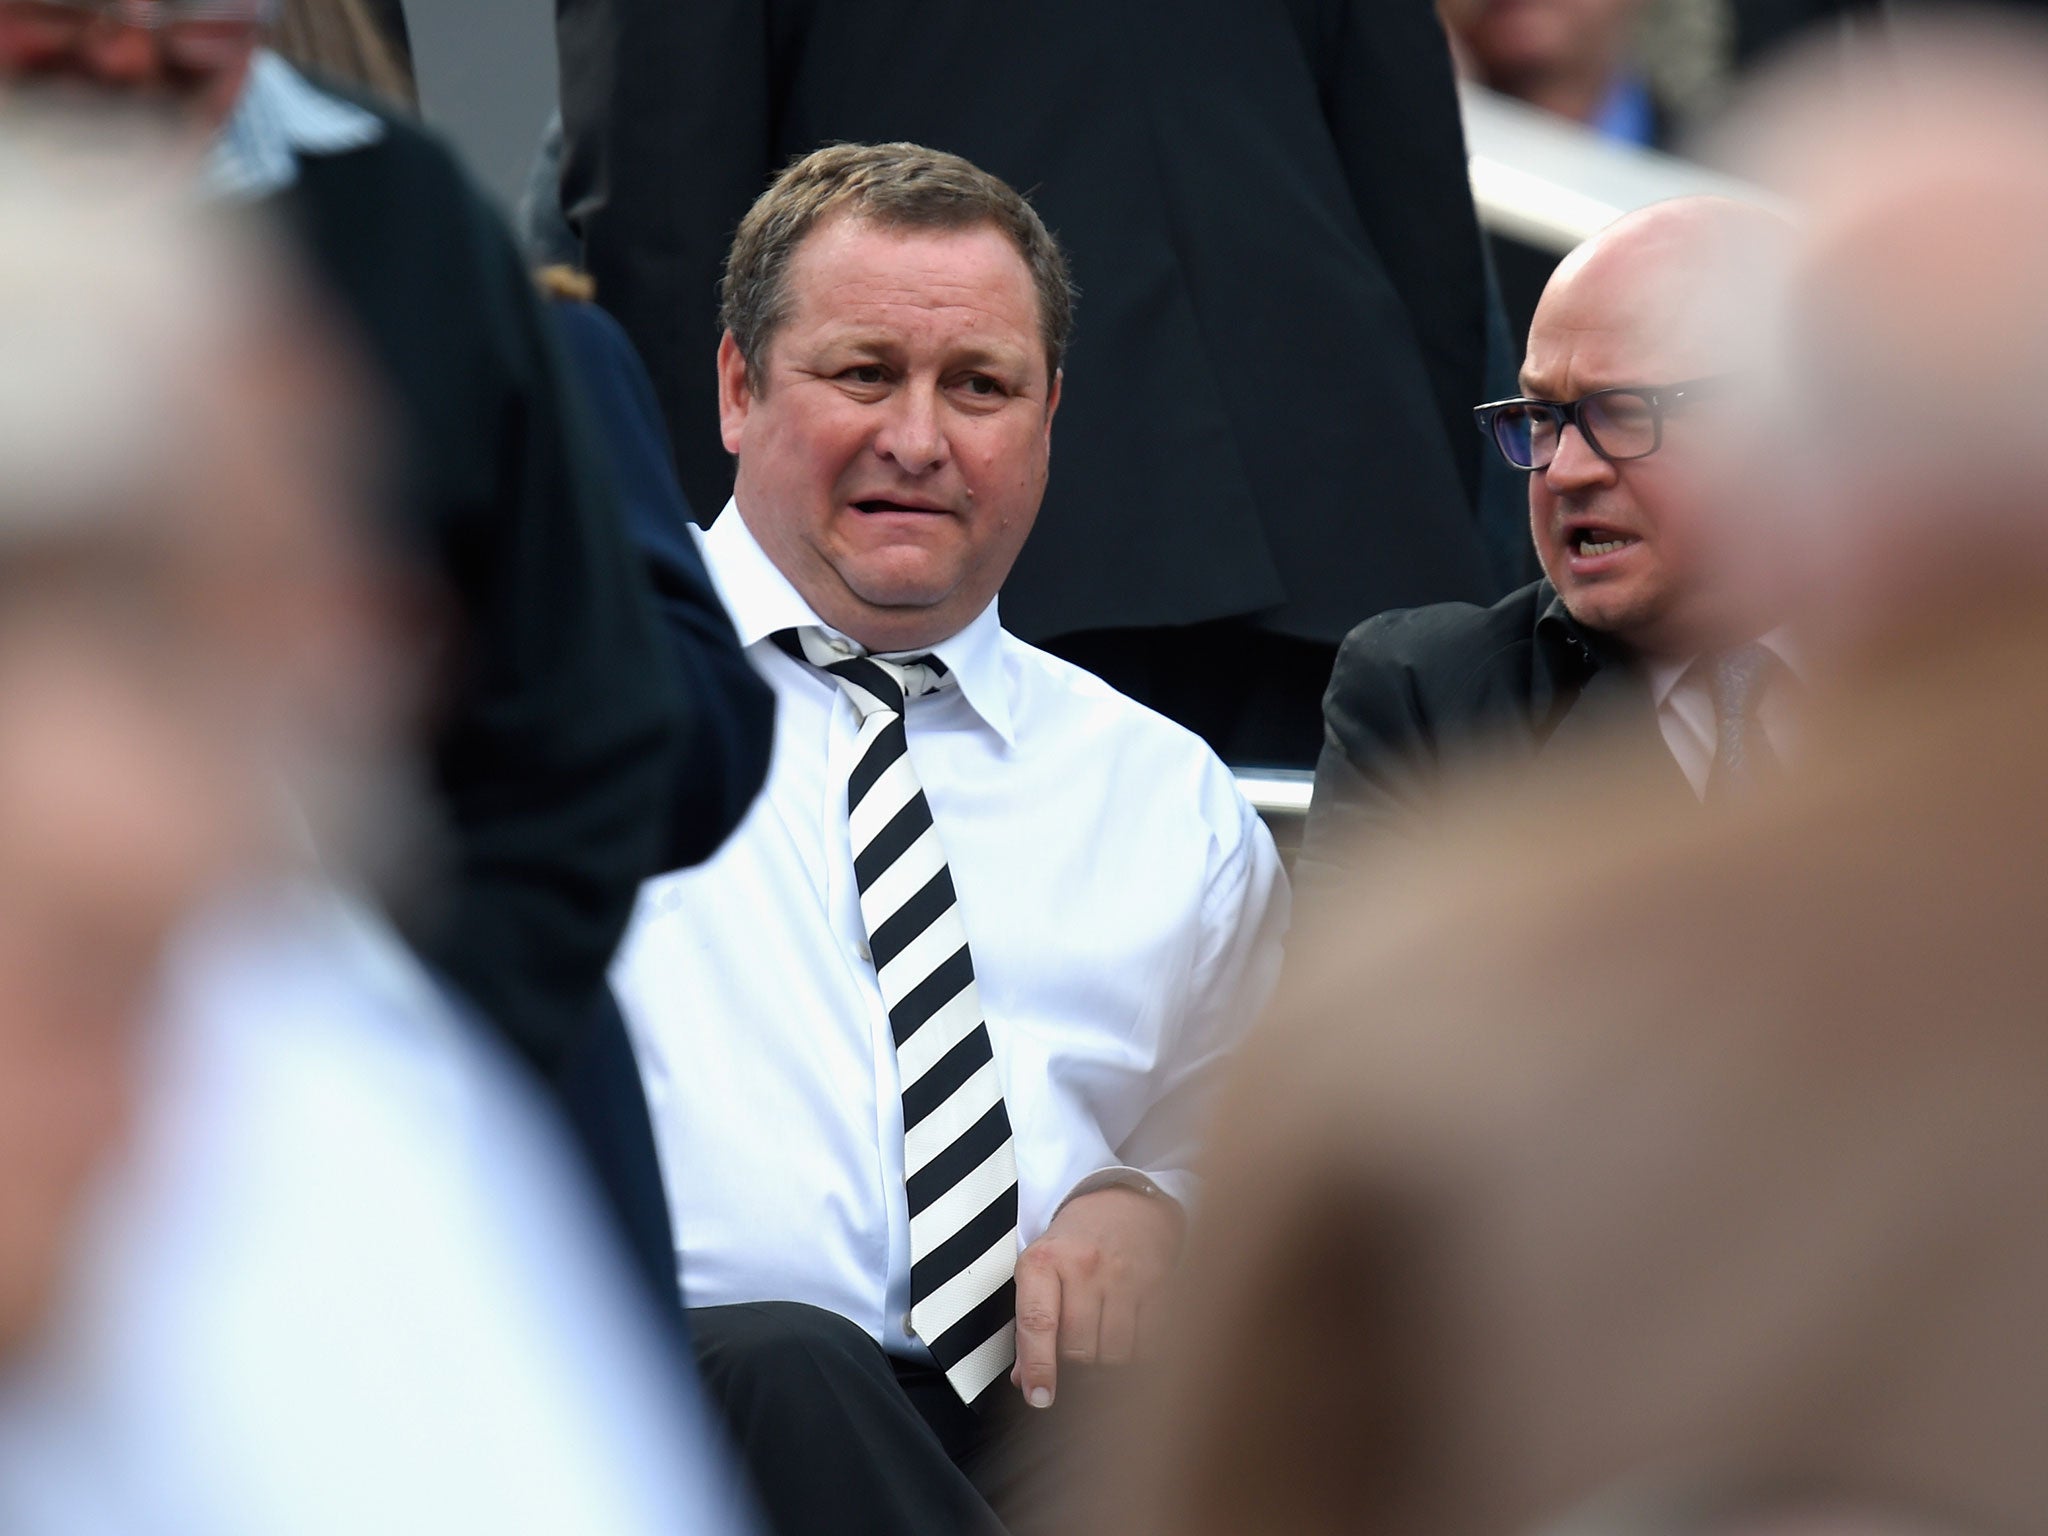 Newcastle United and Mike Ashley will finally cut ties with one another